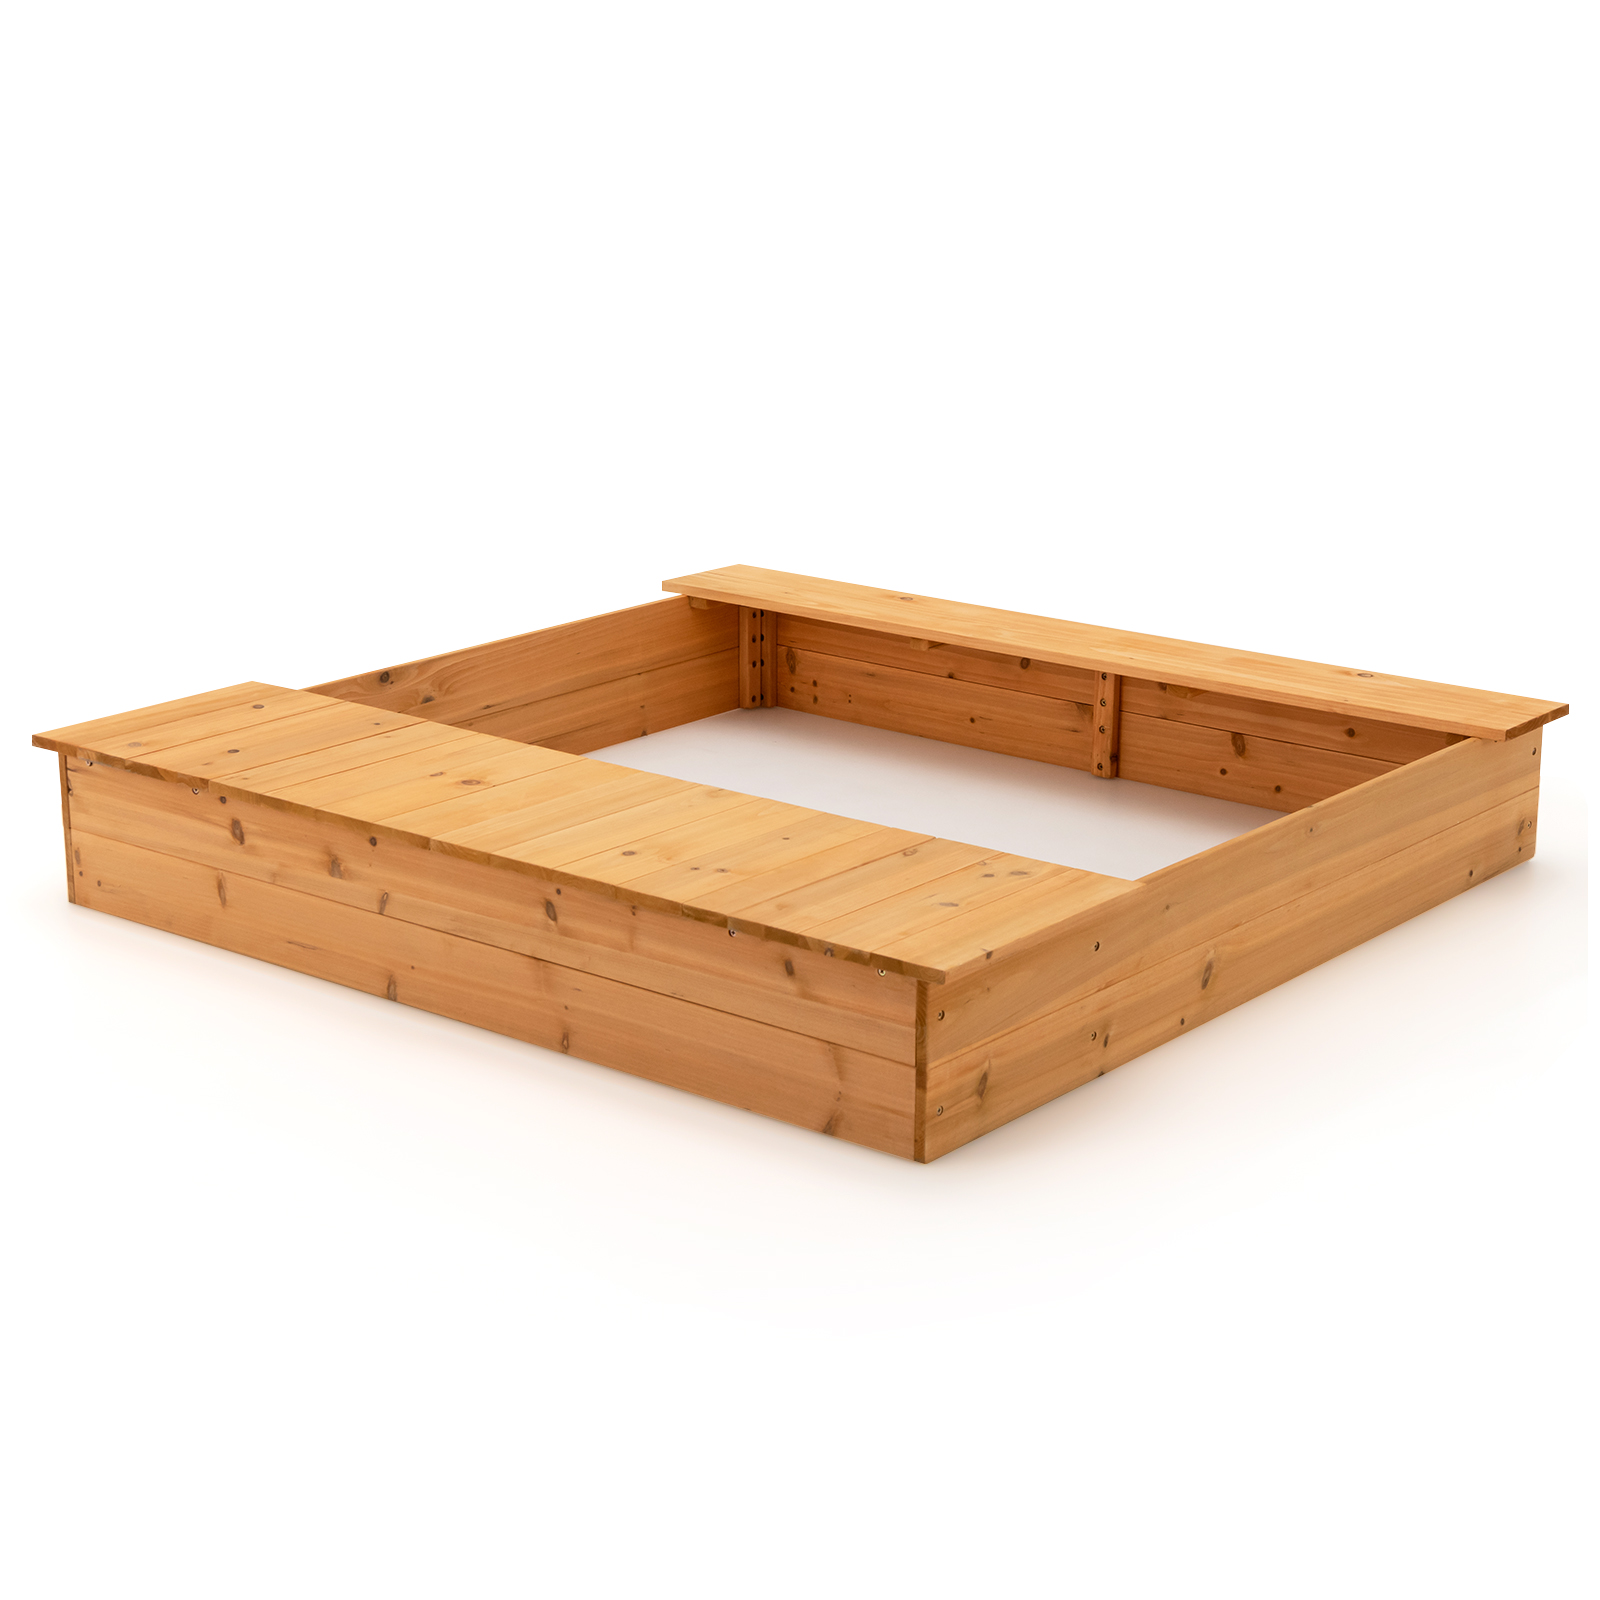 Covered Wooden Kids Sandbox with 2 Storage Boxes and Bottomless Design